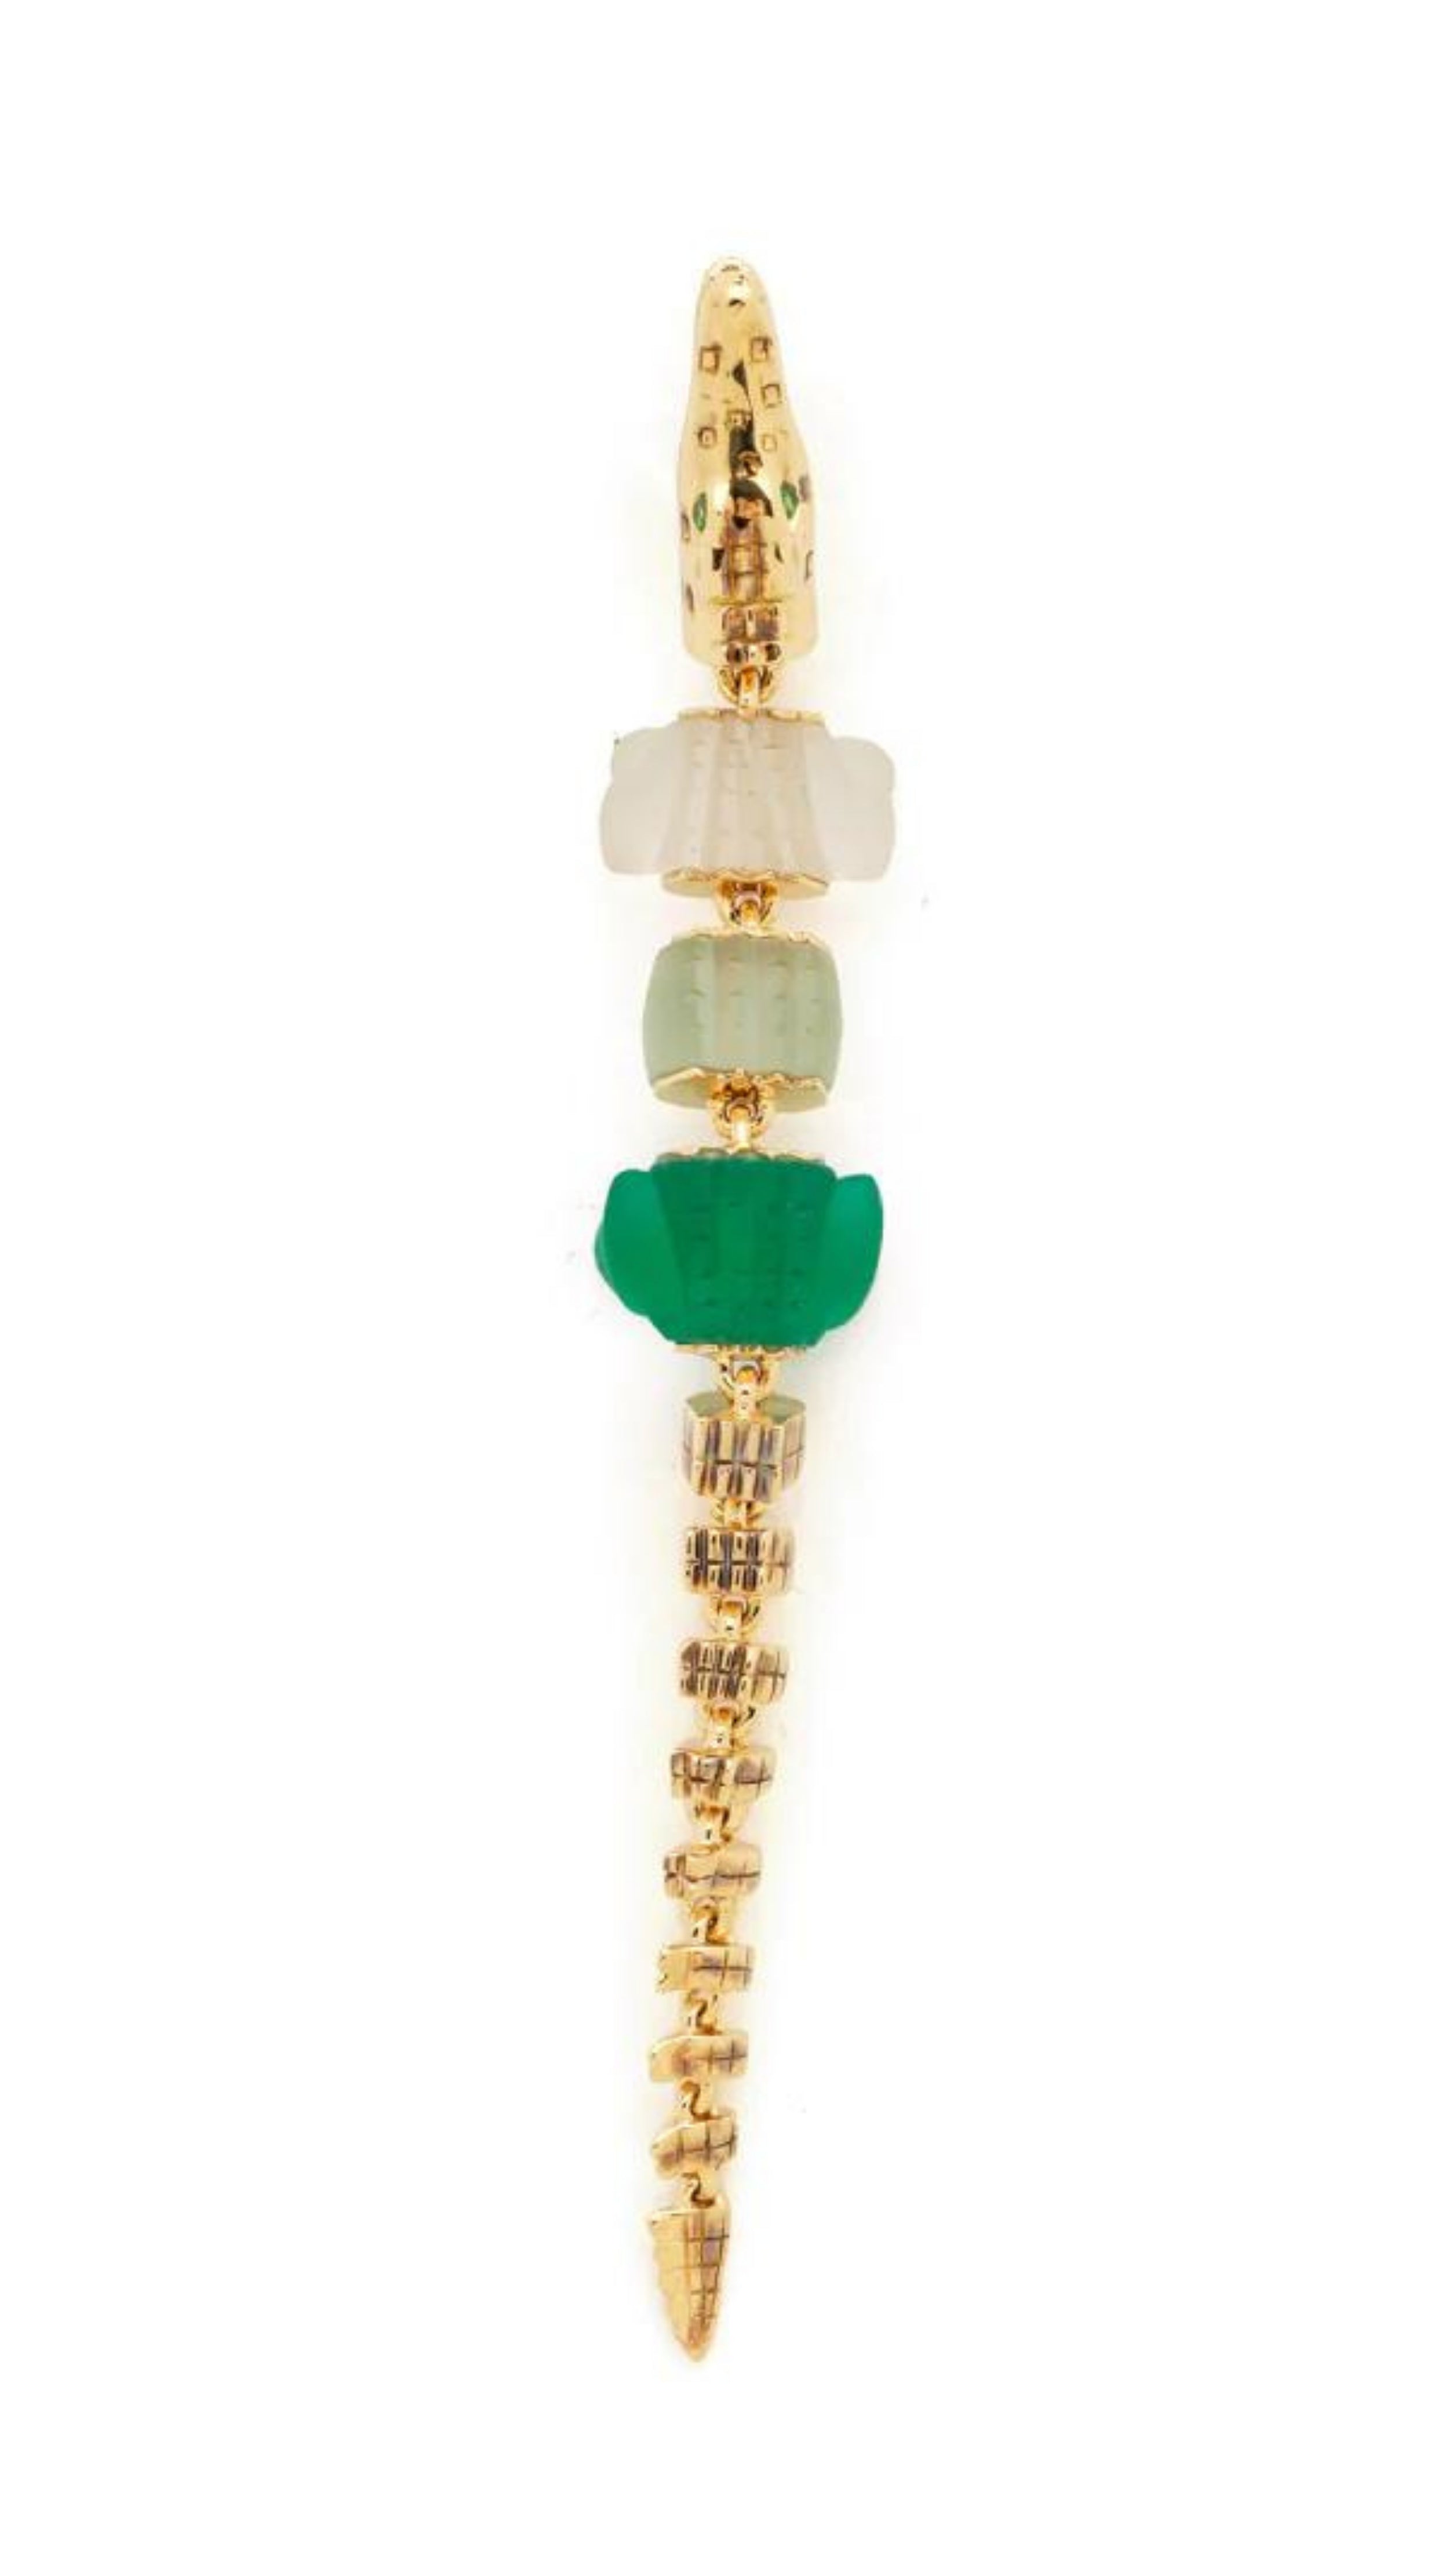 Bibi van der Velden Green Gradient Alligator Vertebrae Bite Earring. Crafted in 18K yellow gold, the alligator's body is formed by White Quartz, Green Amethyst, Green Agate while the head and tail are in solid 18K gold.  Photo shows earring from above.